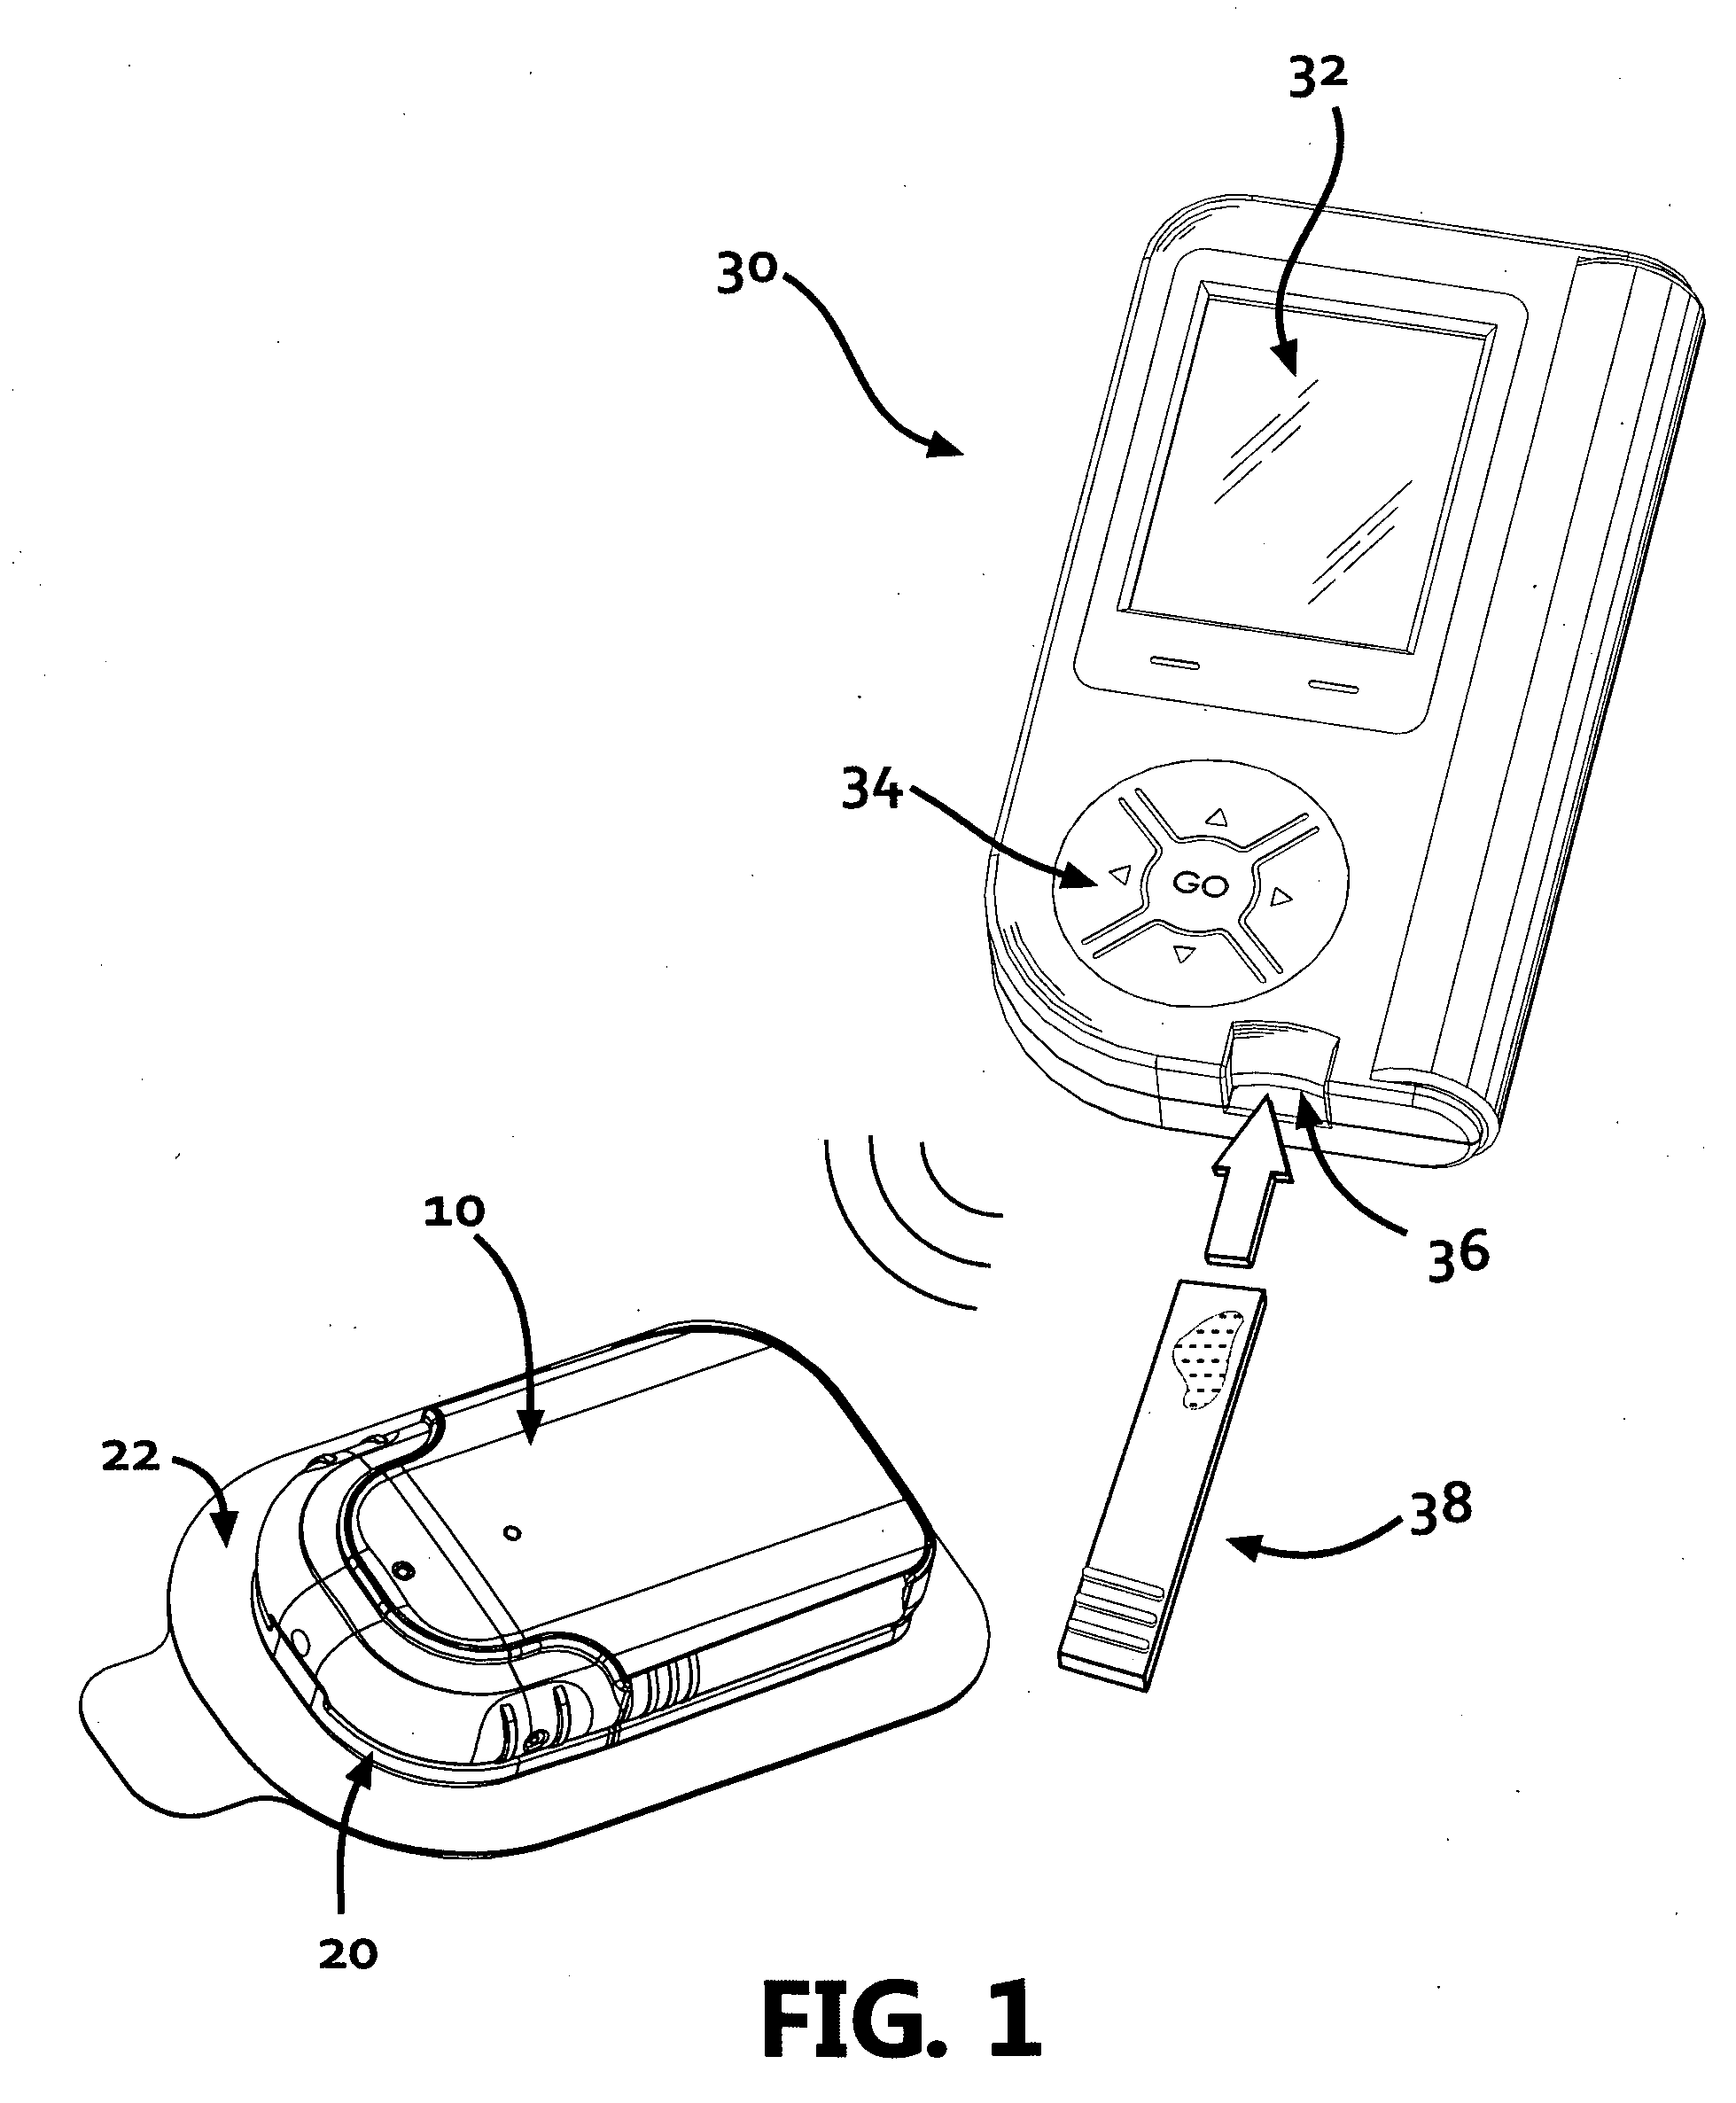 Systems, methods and devices for accurate infusion of fluids